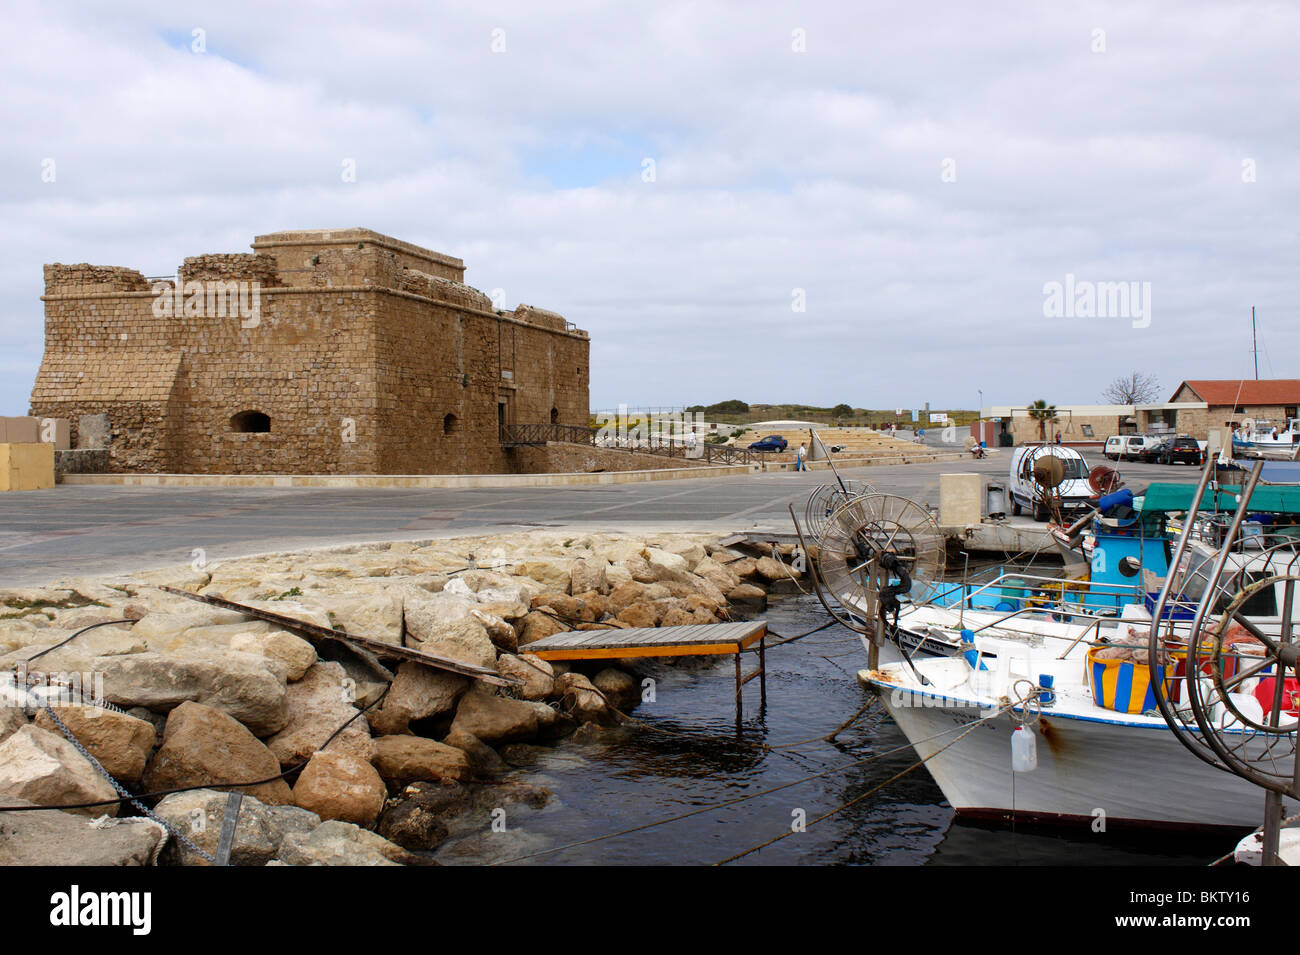 PAPHOS HARBOUR ON THE ISLAND OF CYPRUS. EUROPE. Stock Photo